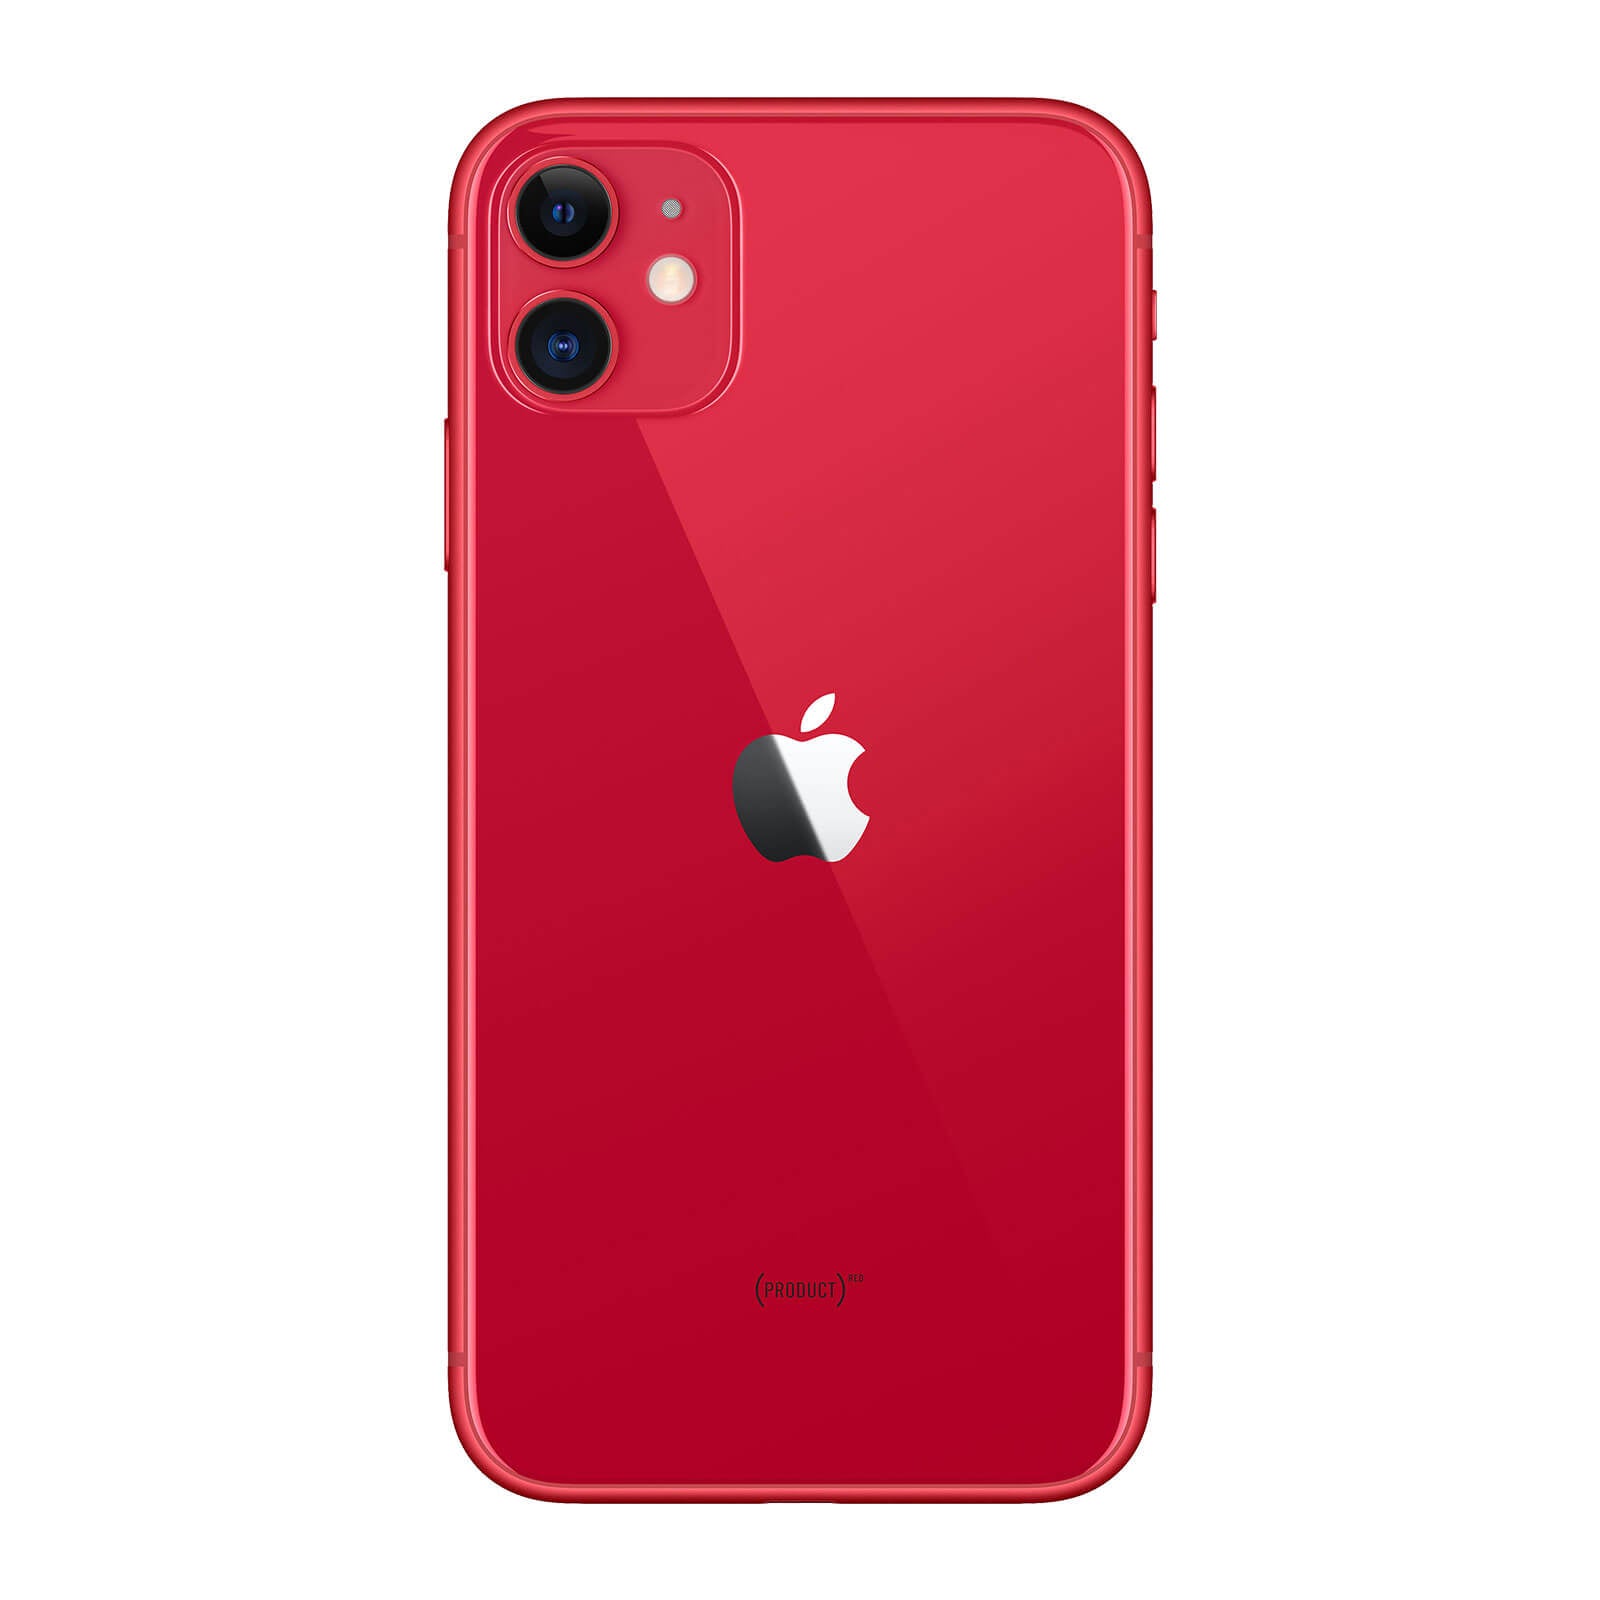 Apple iPhone 11 256GB Product Red Very Good - AT&T